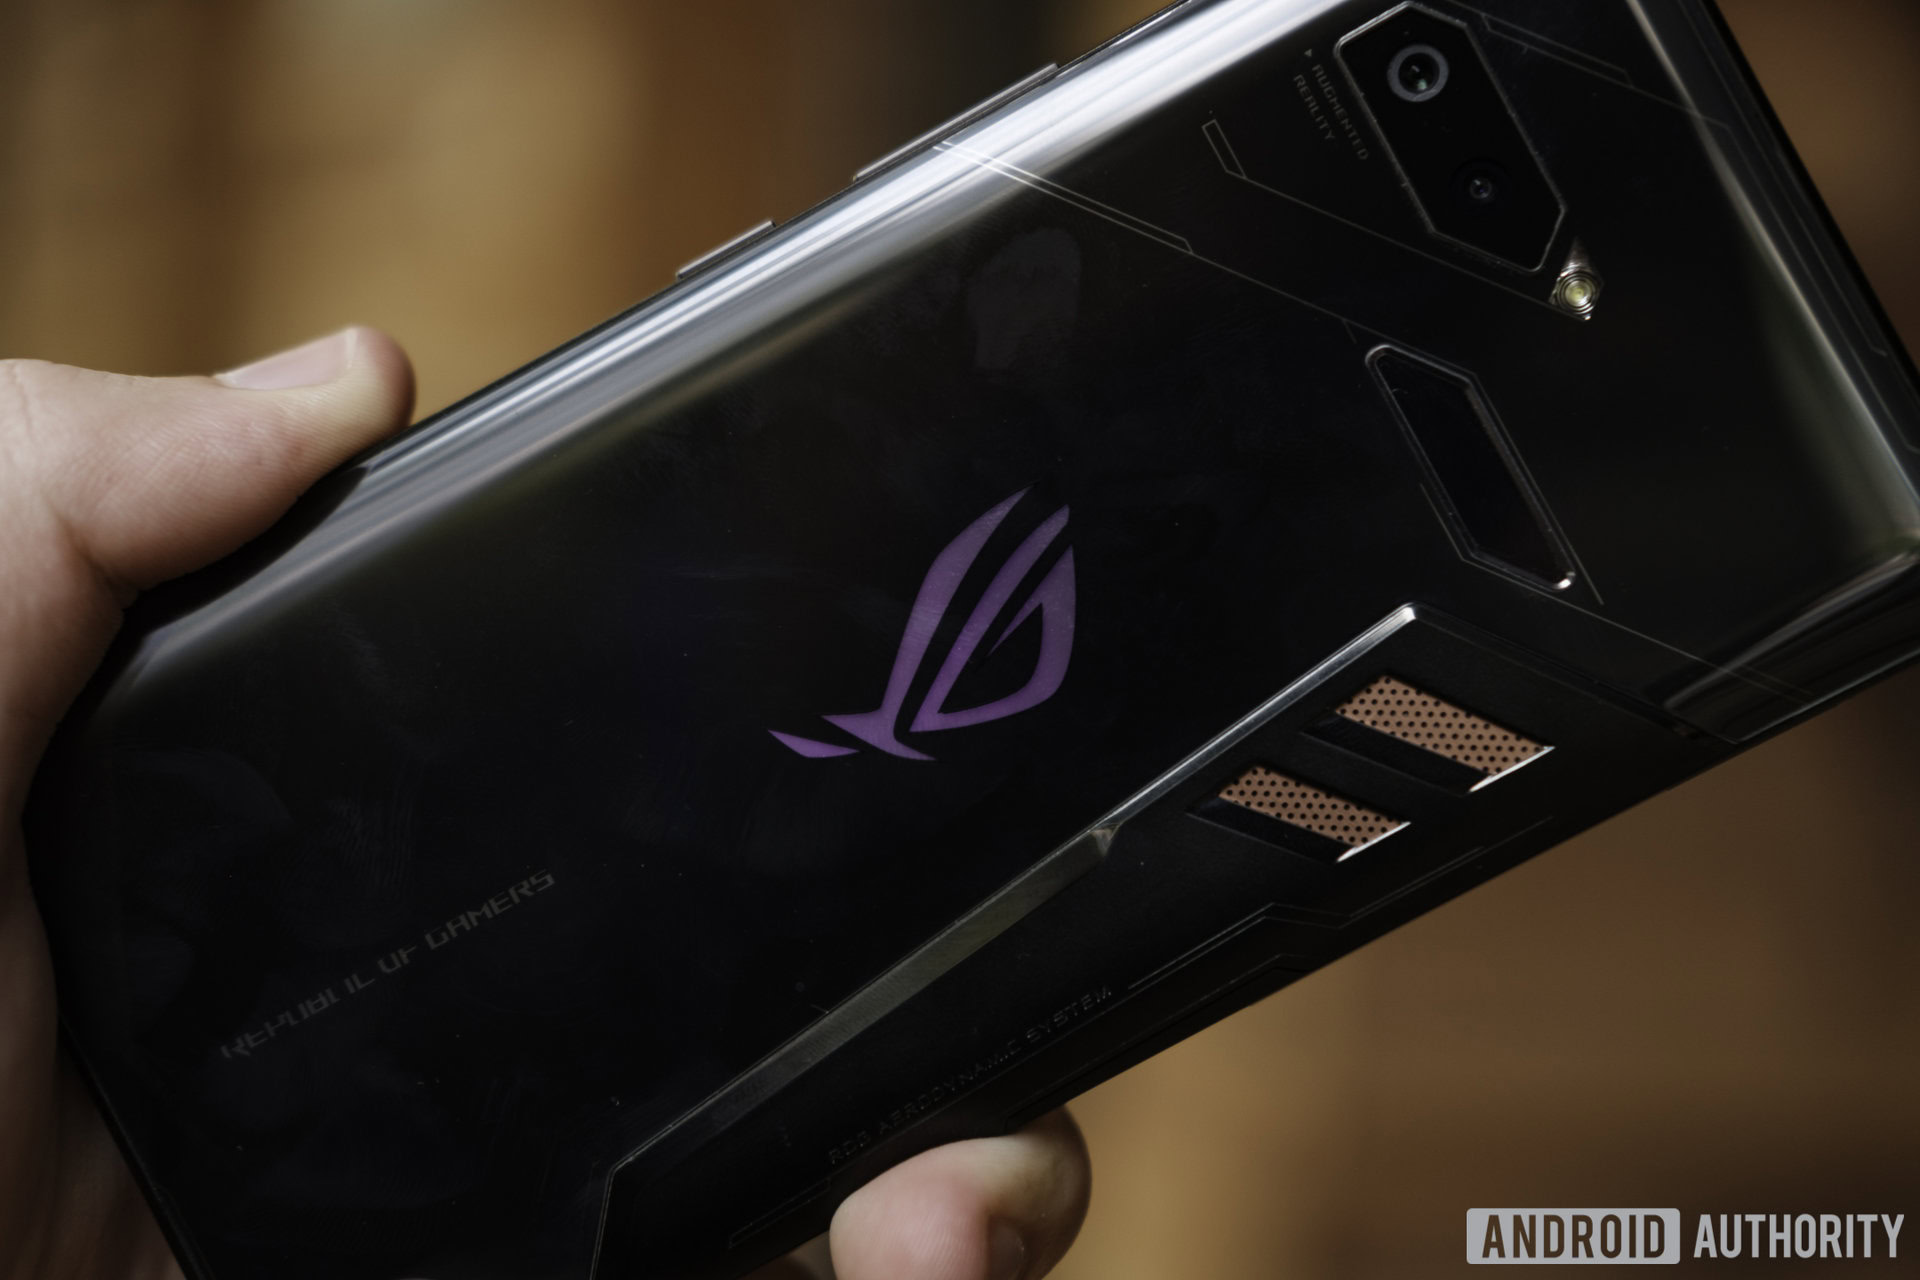 ASUS ROG Phone UK availability will begin on December 14, 2018